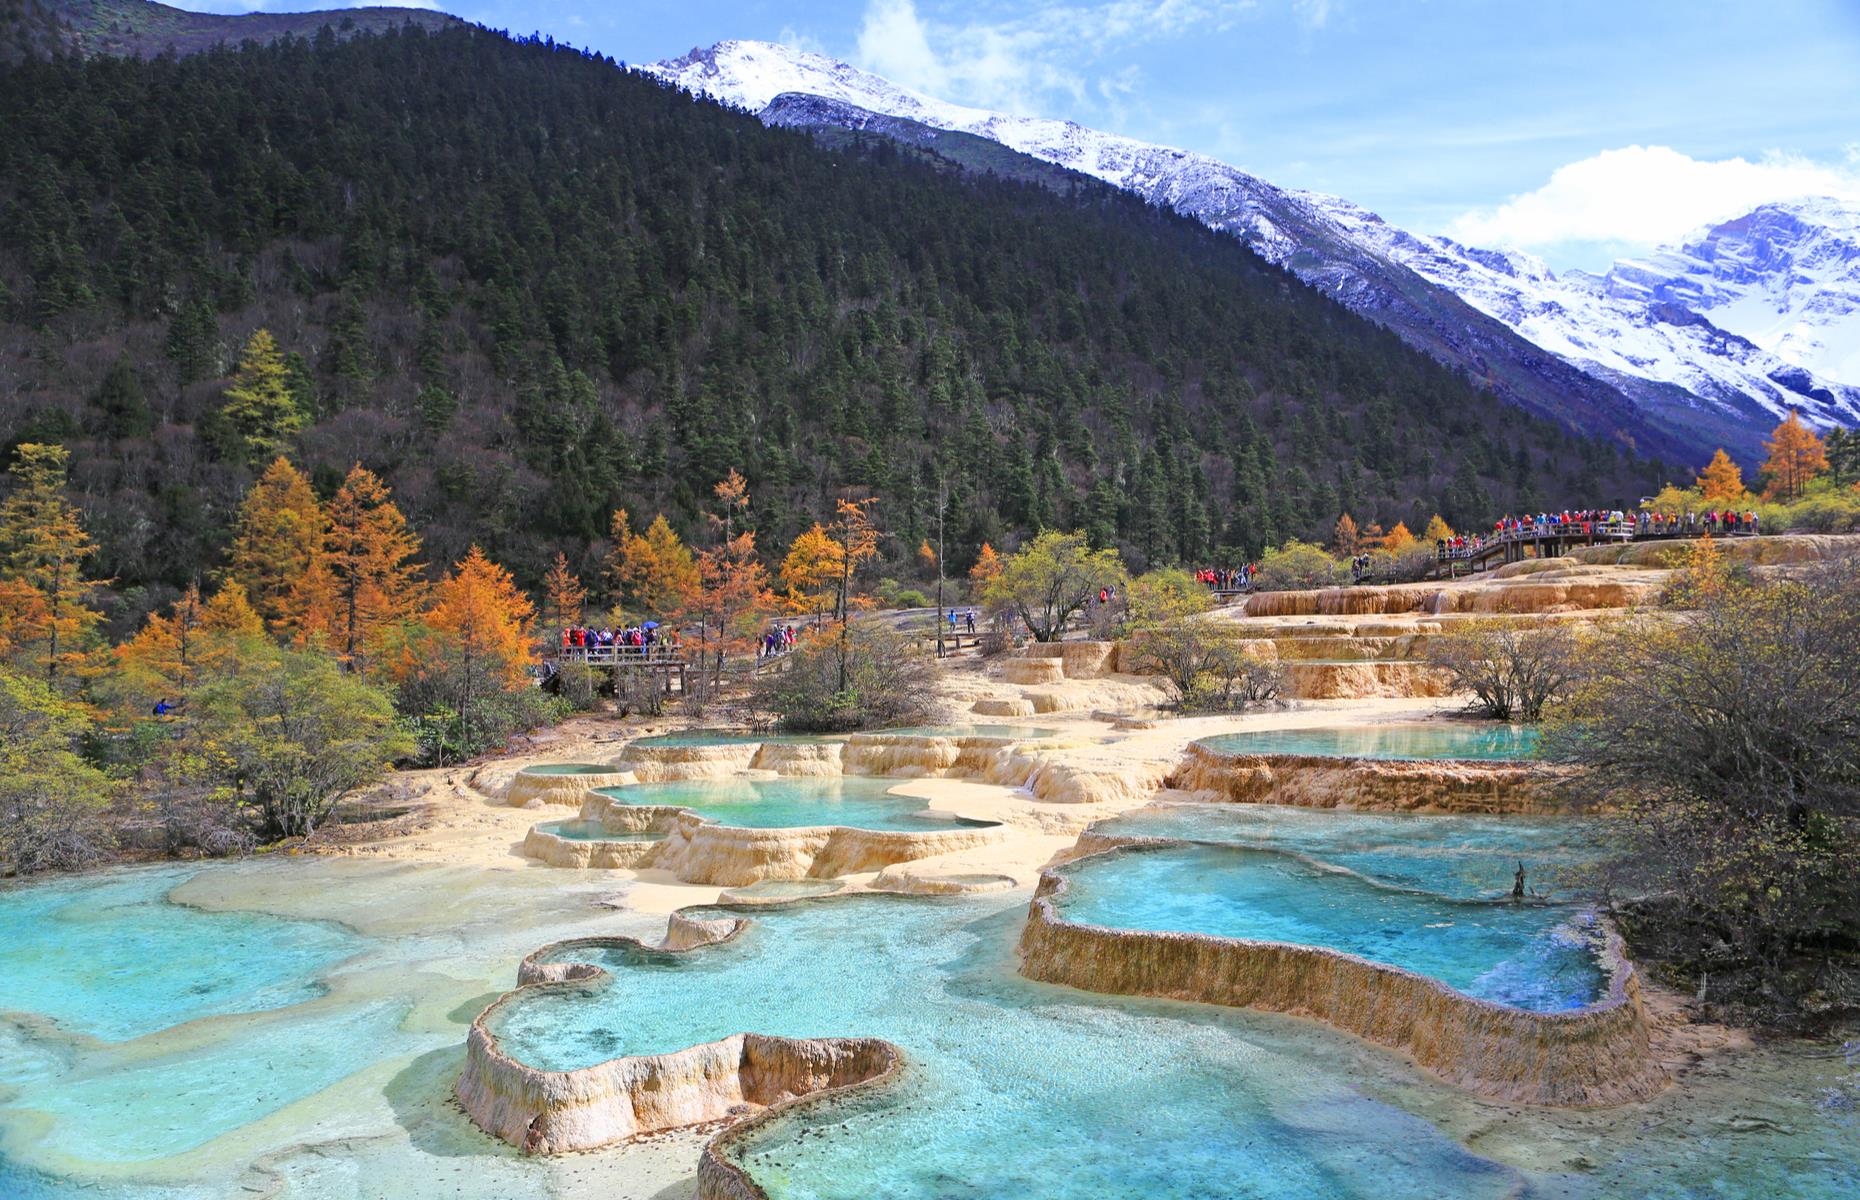 In China’s Huanglong Valley, hot spring water cascades down a series of intensely aquamarine terraced pools, creating a breathtaking spectacle. Formed from calcium carbonate, the ponds and lakes stretch for over two miles (3km) through the valley, which is home to giant pandas and the Sichuan golden snub-nosed monkey. You can't bathe here, but you'll see why Huanglong is known as 'Fairyland on Earth'. Visit in October to see it at its most beautiful.